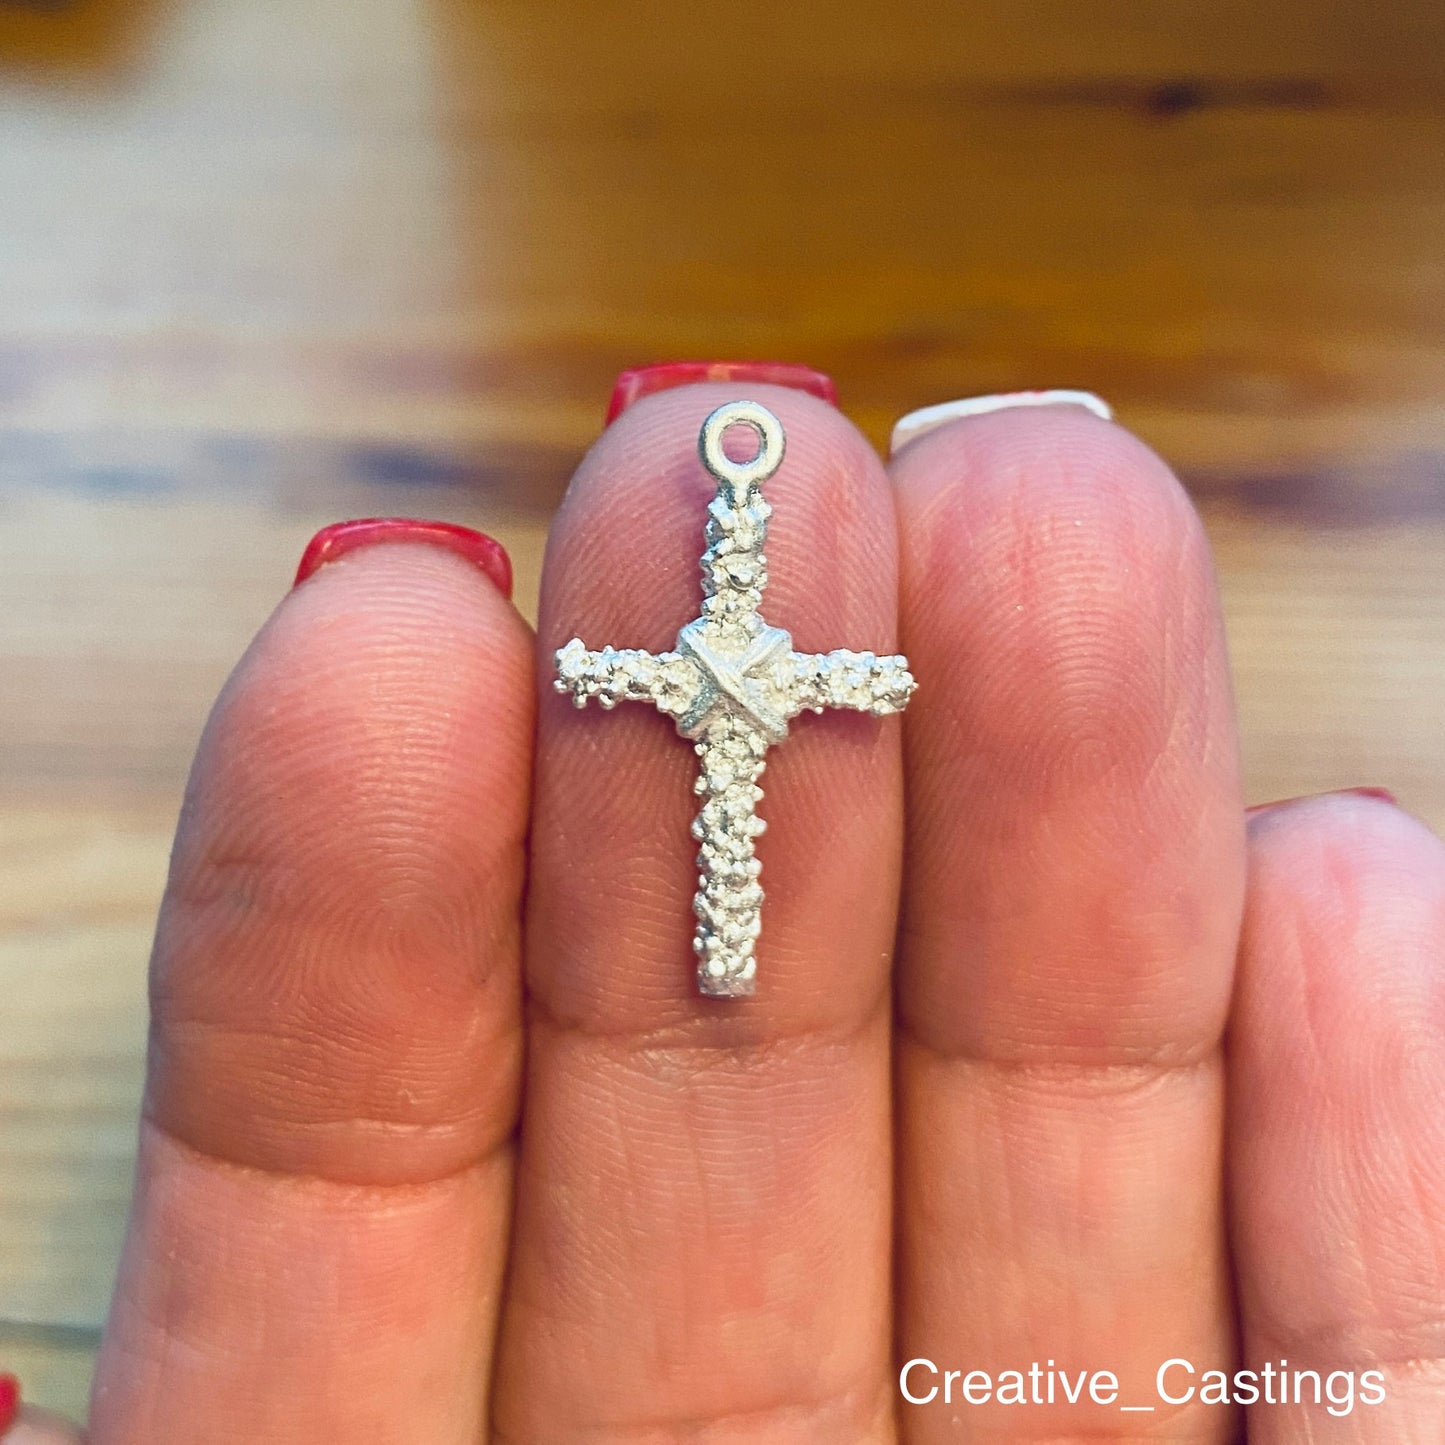 Cast hand crafted Cross